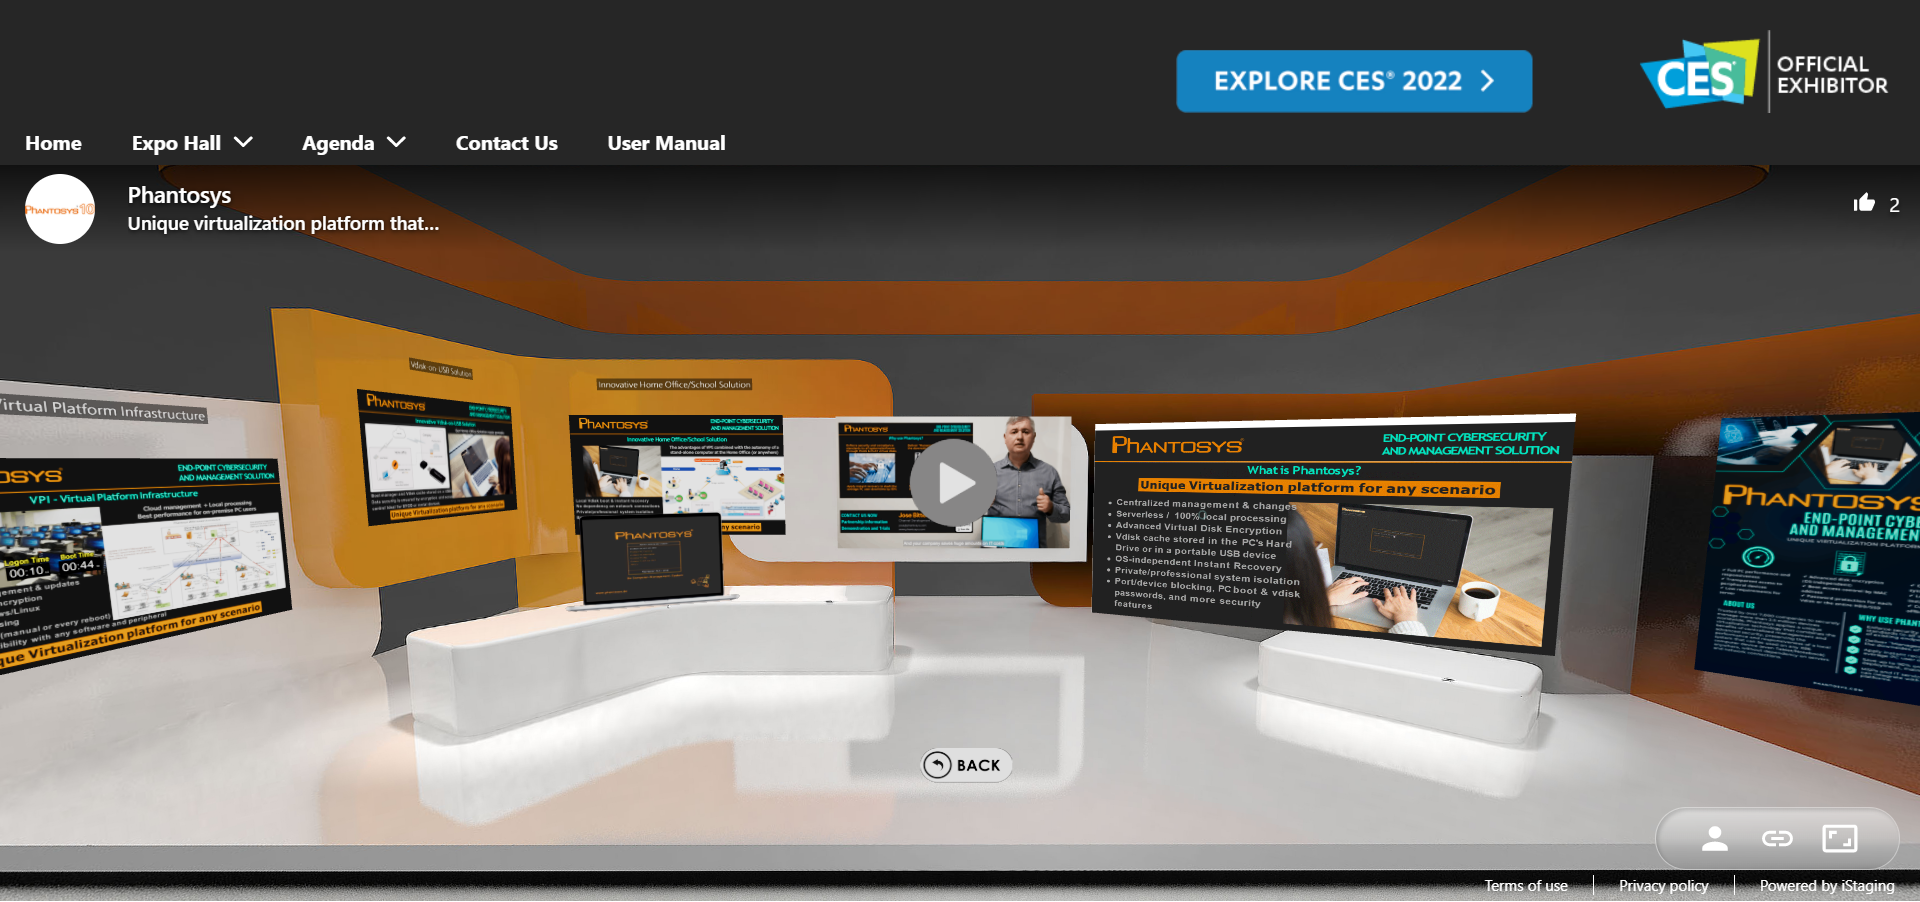 Phantosys at CES 2022 & virtual booth